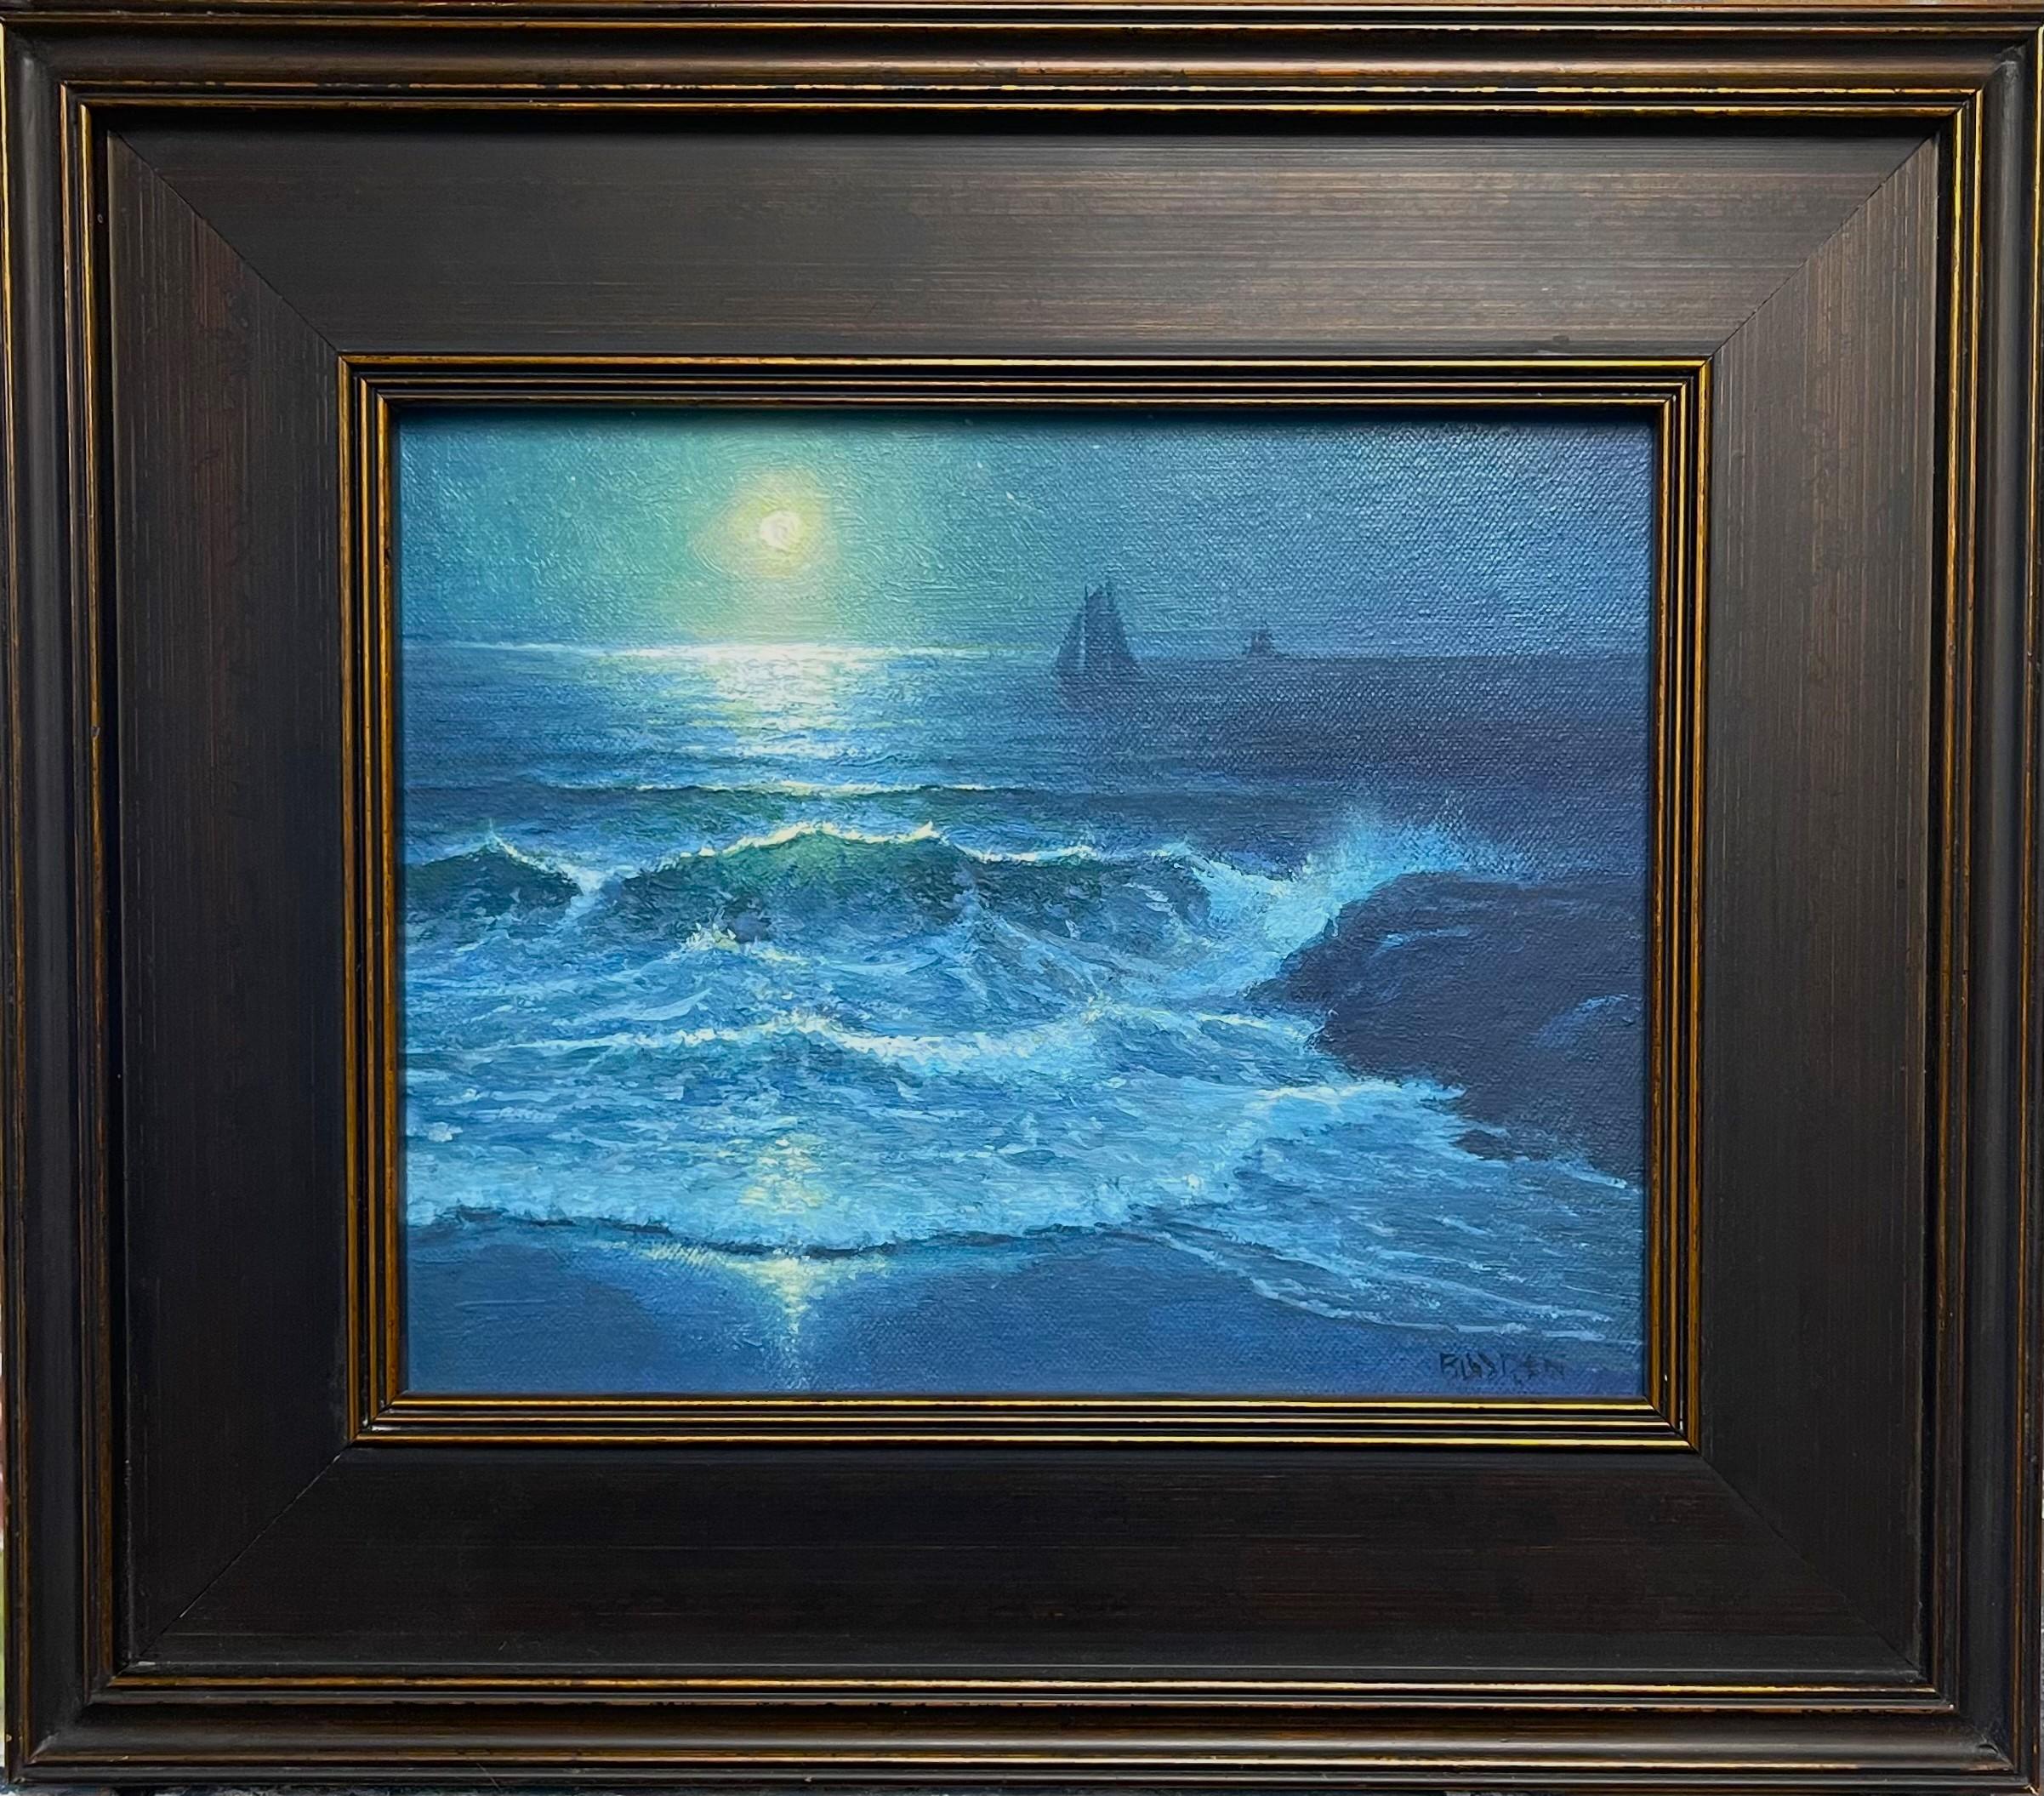 Mystical Moonlight
oil/panel
 8 x 10 unframed  13.25 x 15.25 framed.
An oil painting on canvas by award winning contemporary artist Michael Budden that showcases a beautiful moonlit seascape view of sailboats from the beach and jetty created in an